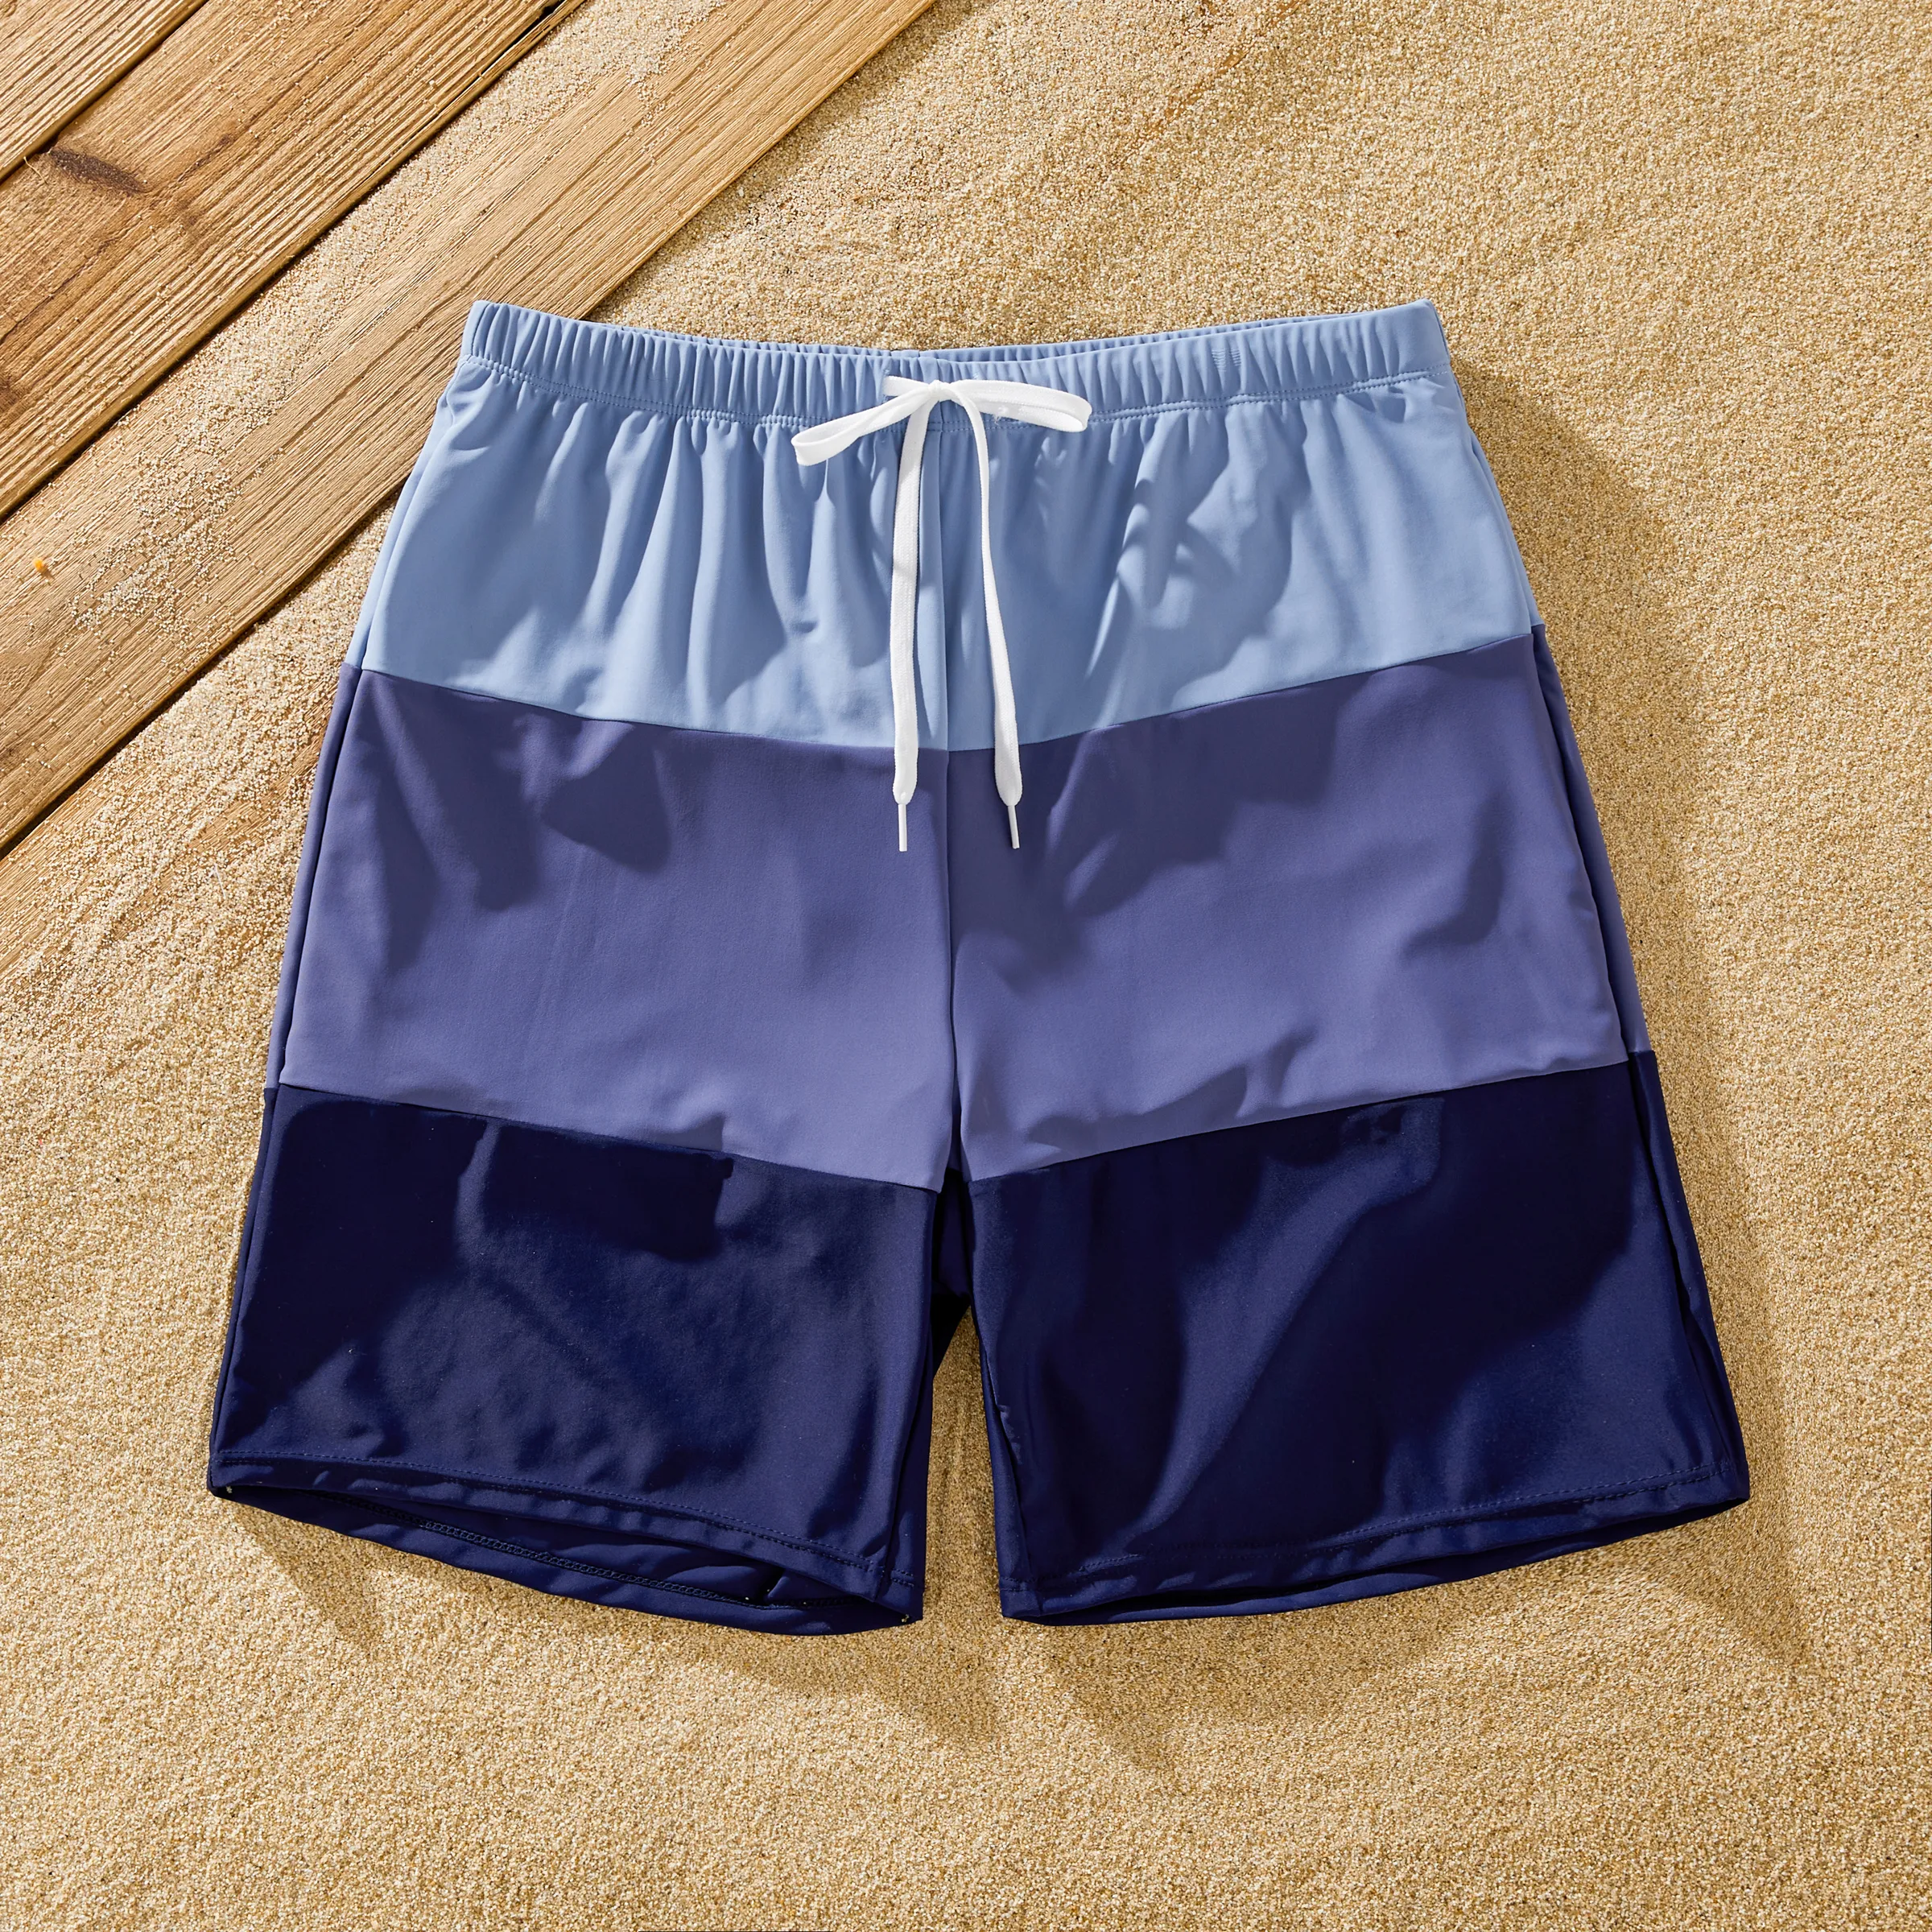 Family Matching Drawstring Swim Trunks or Ruched Bow Tie Cut Out Mesh Ruffle Strap One-Piece Swimsui